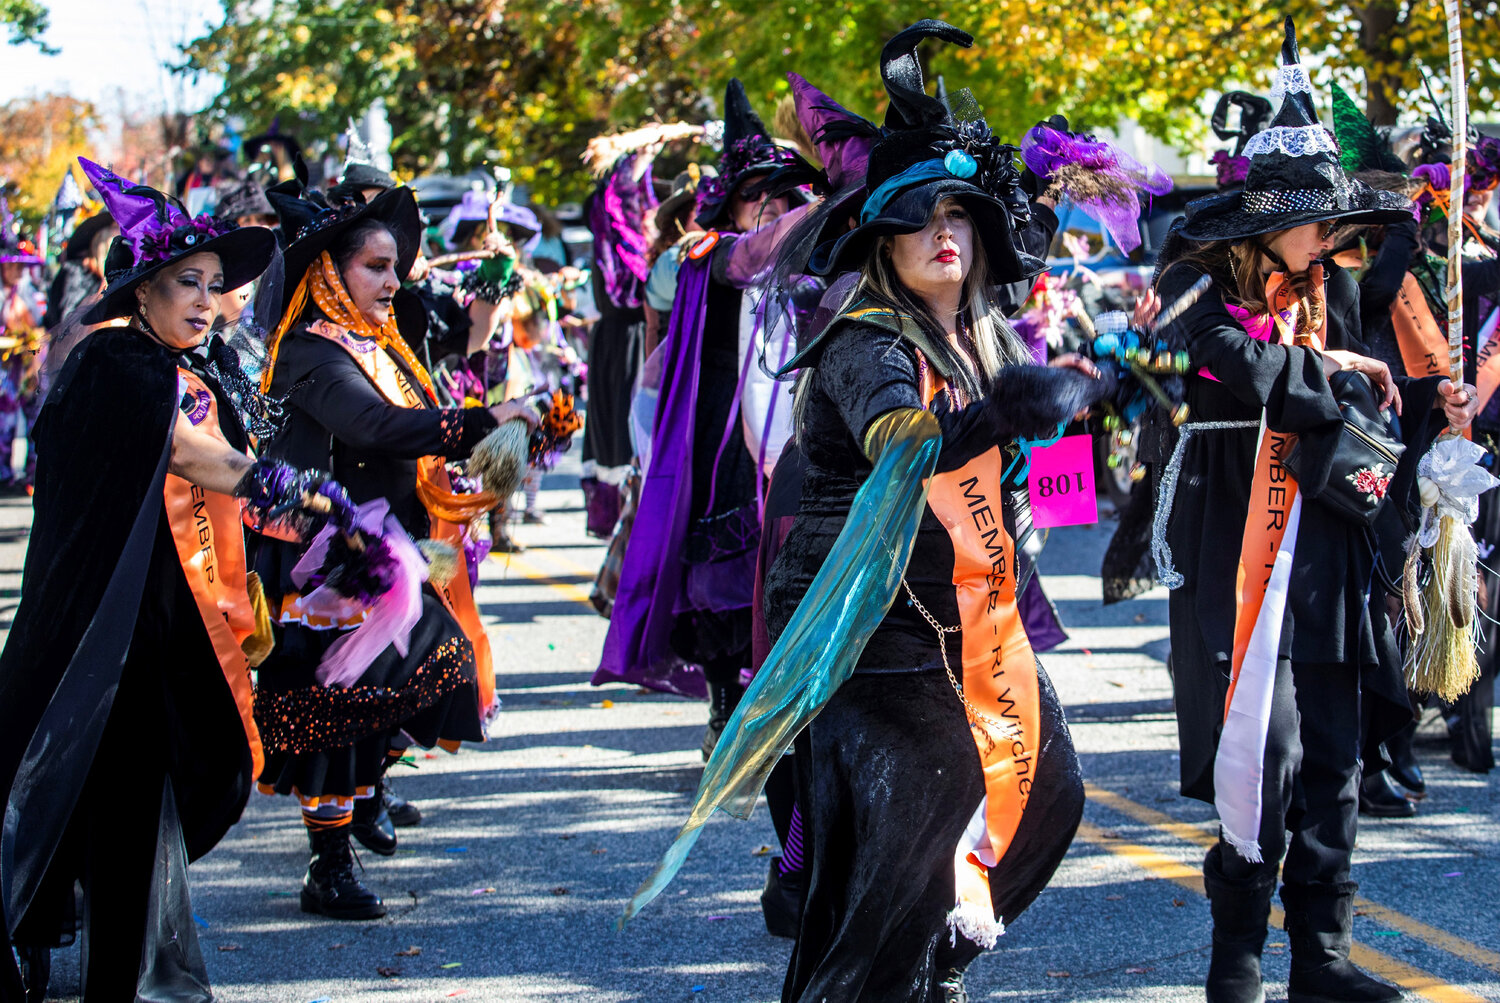 Don’t miss the spectacle that is the Witch’s Dance Parade in Wickford